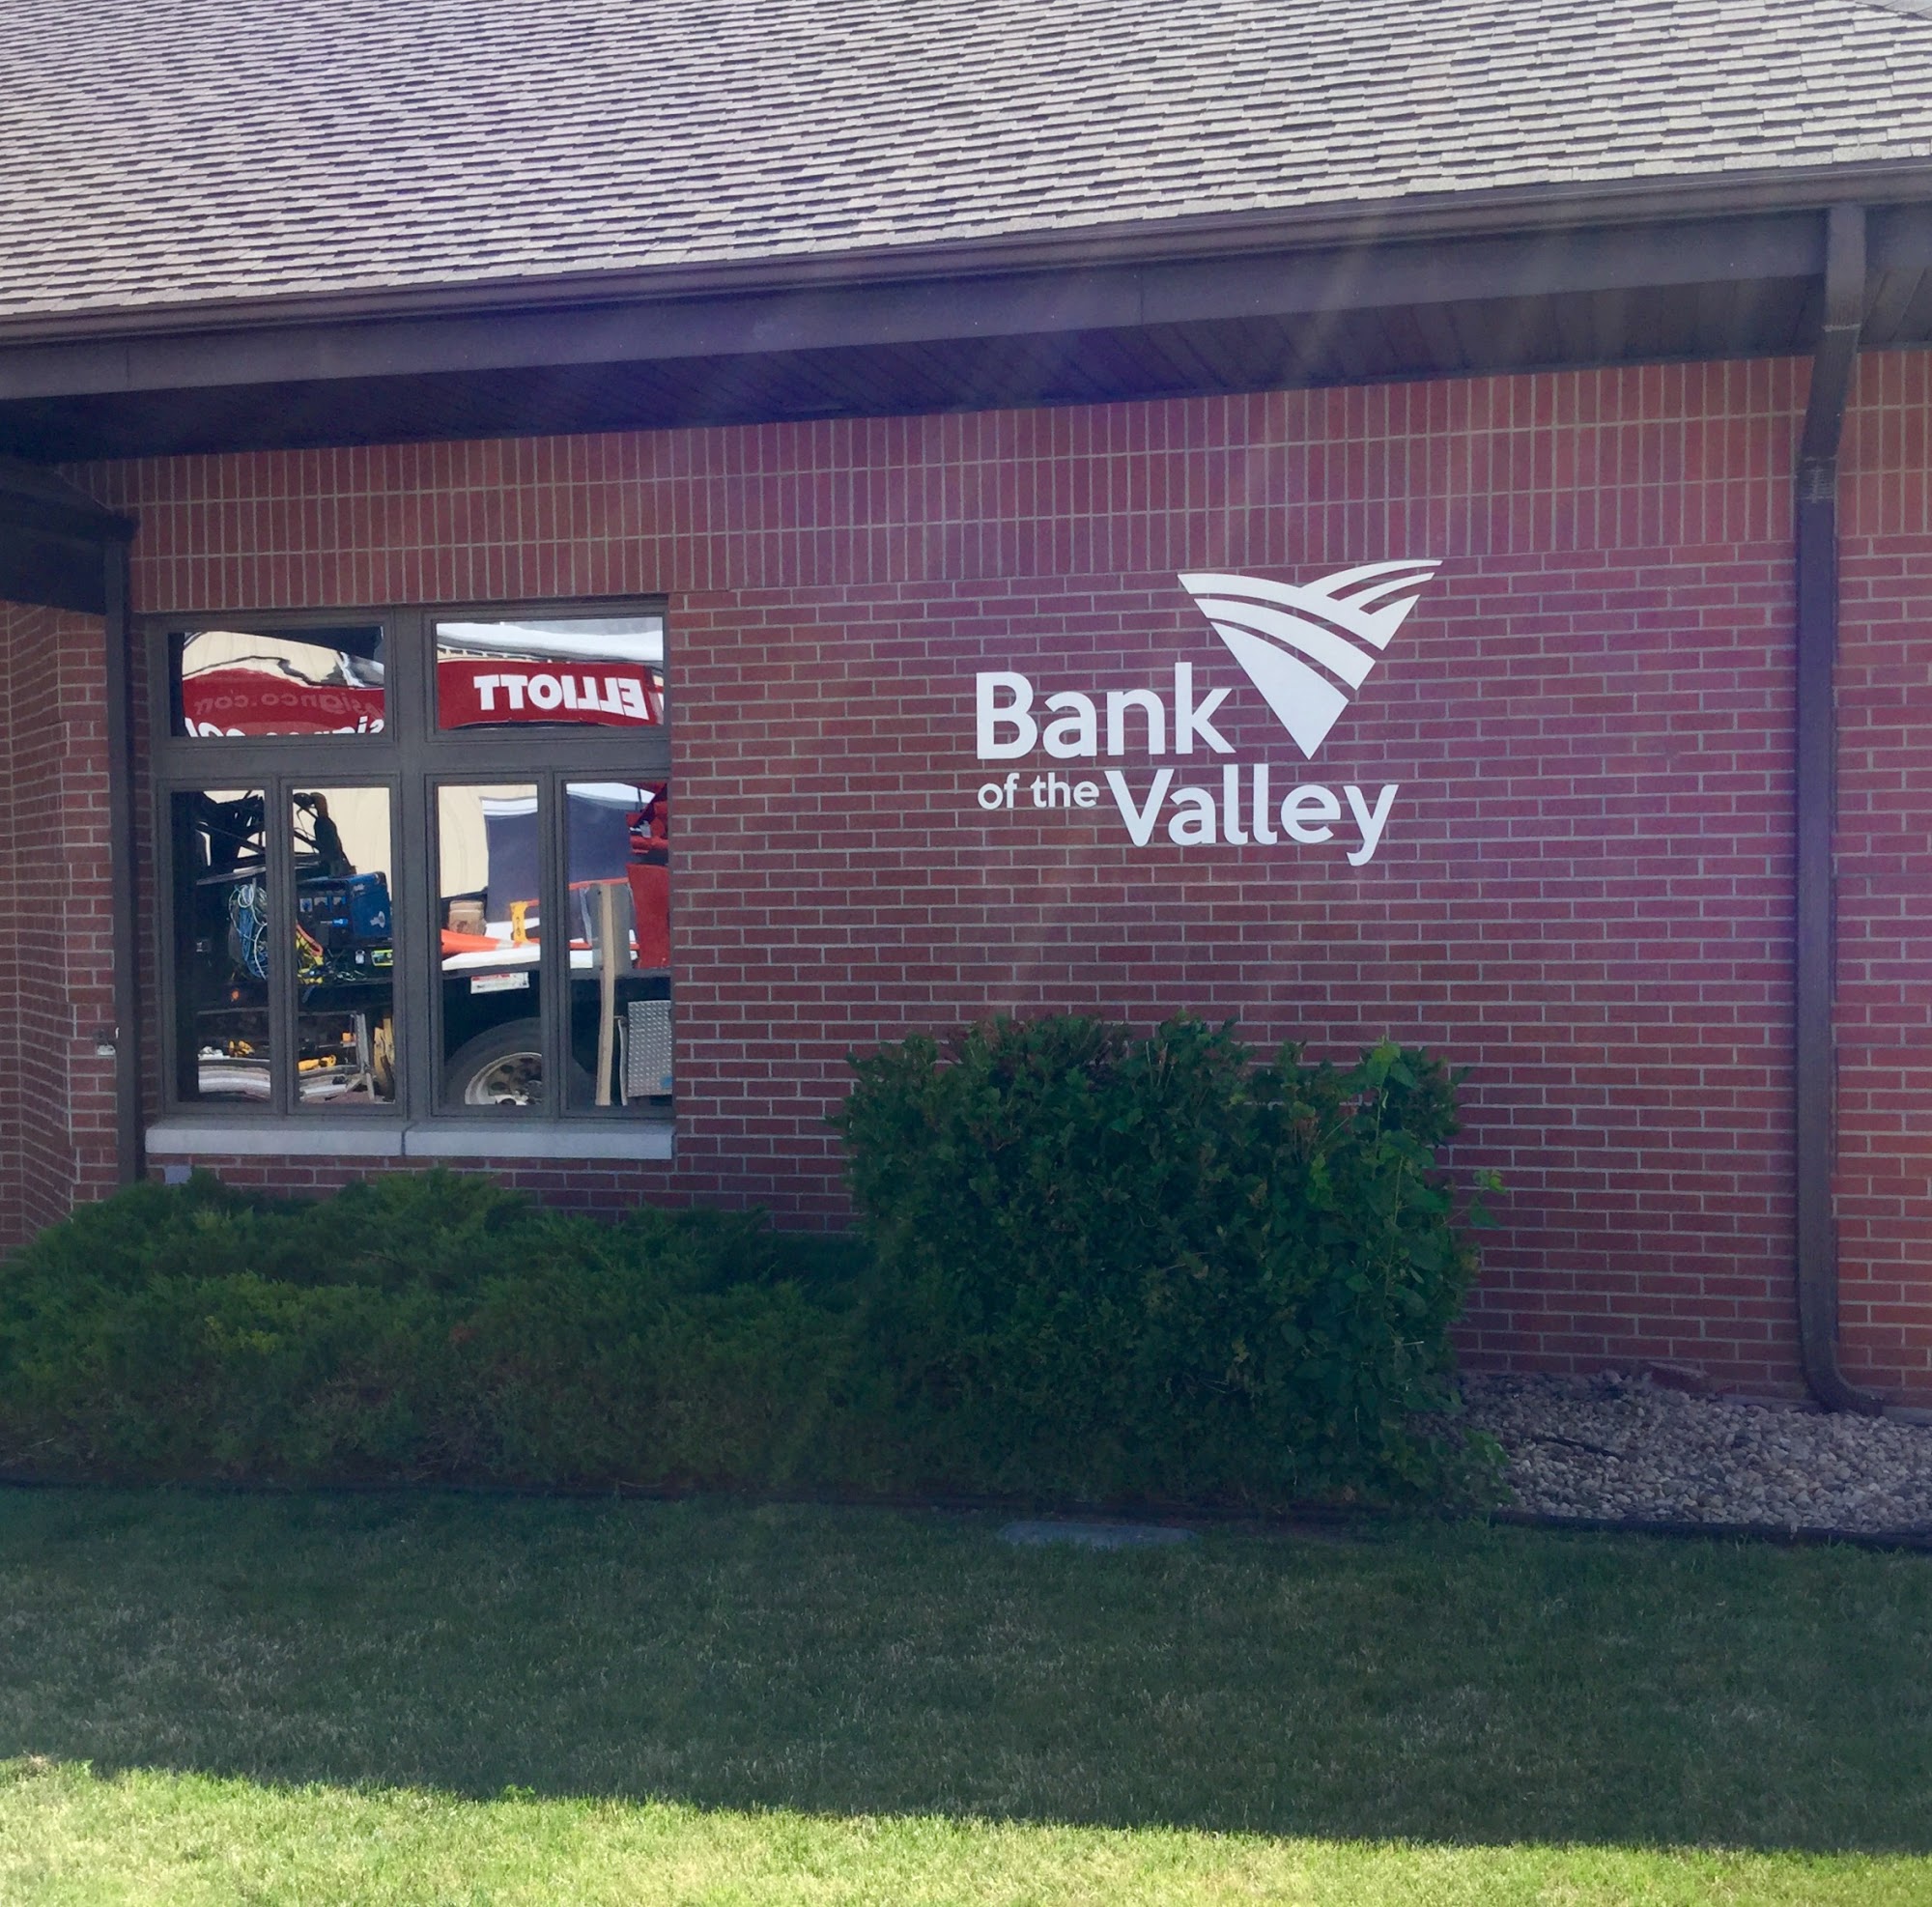 Bank of the Valley